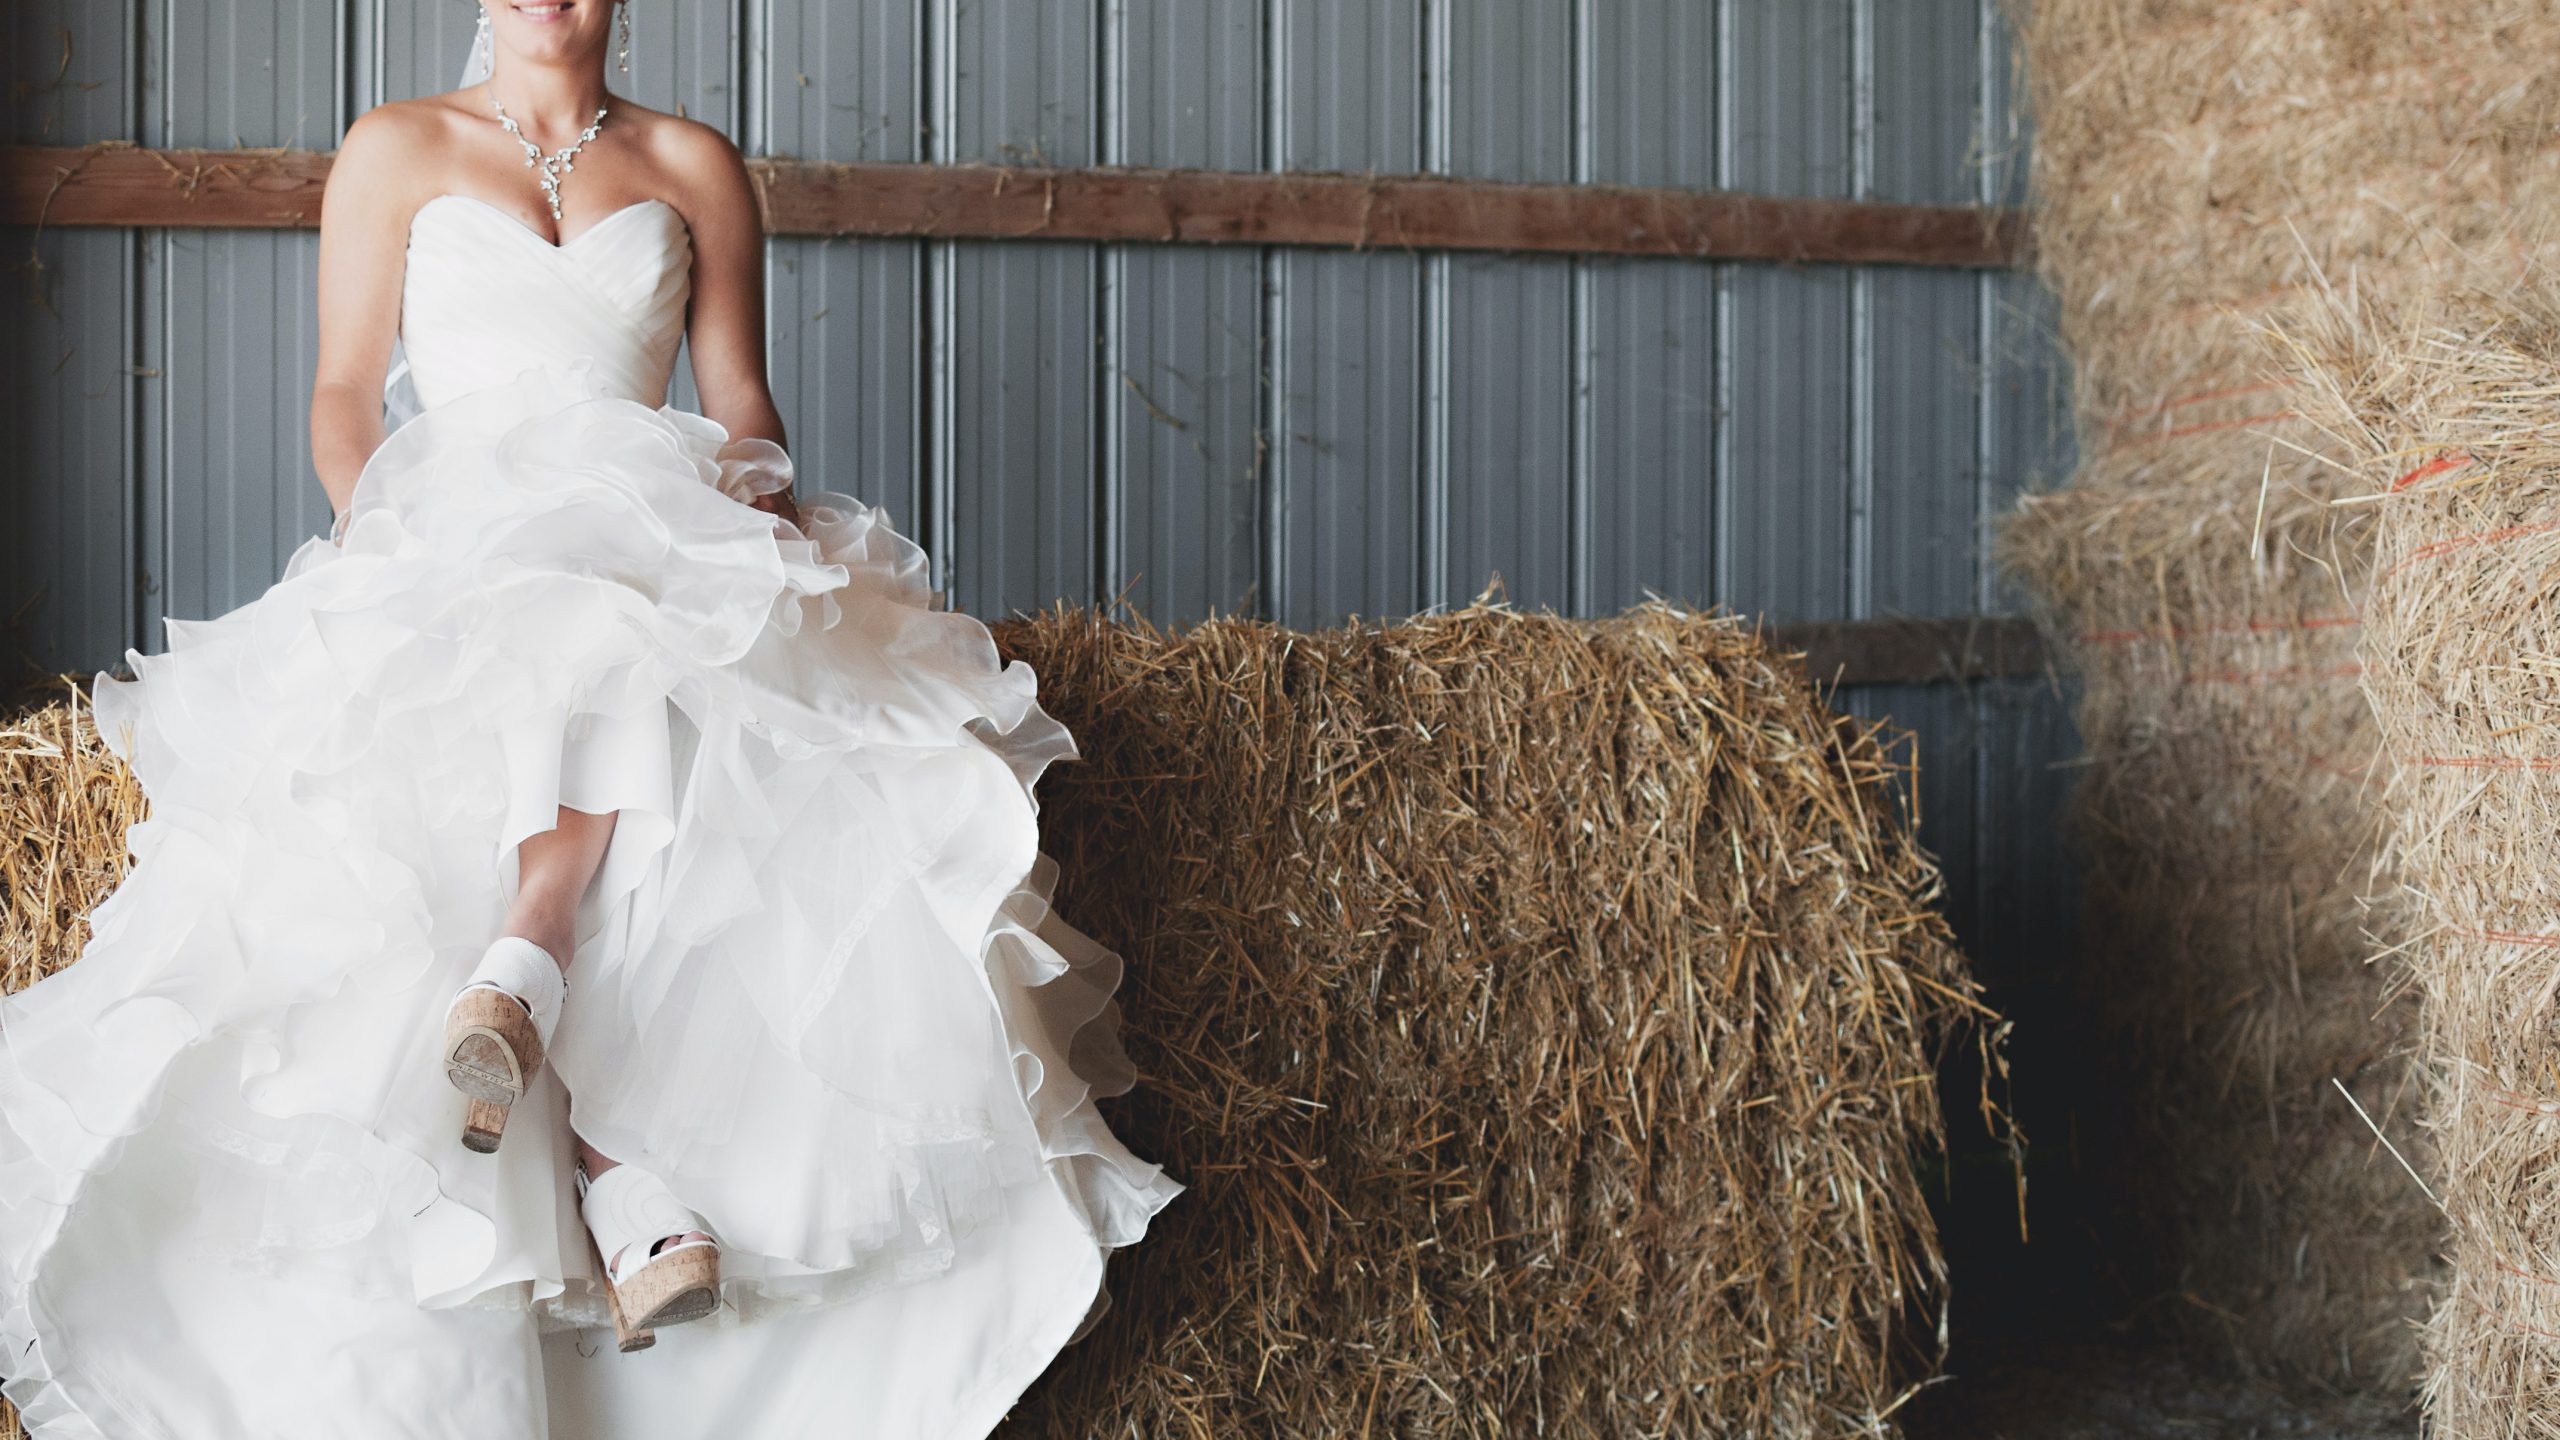 Strapless Wedding Dresses: 15 Bridal Gowns + Faqs